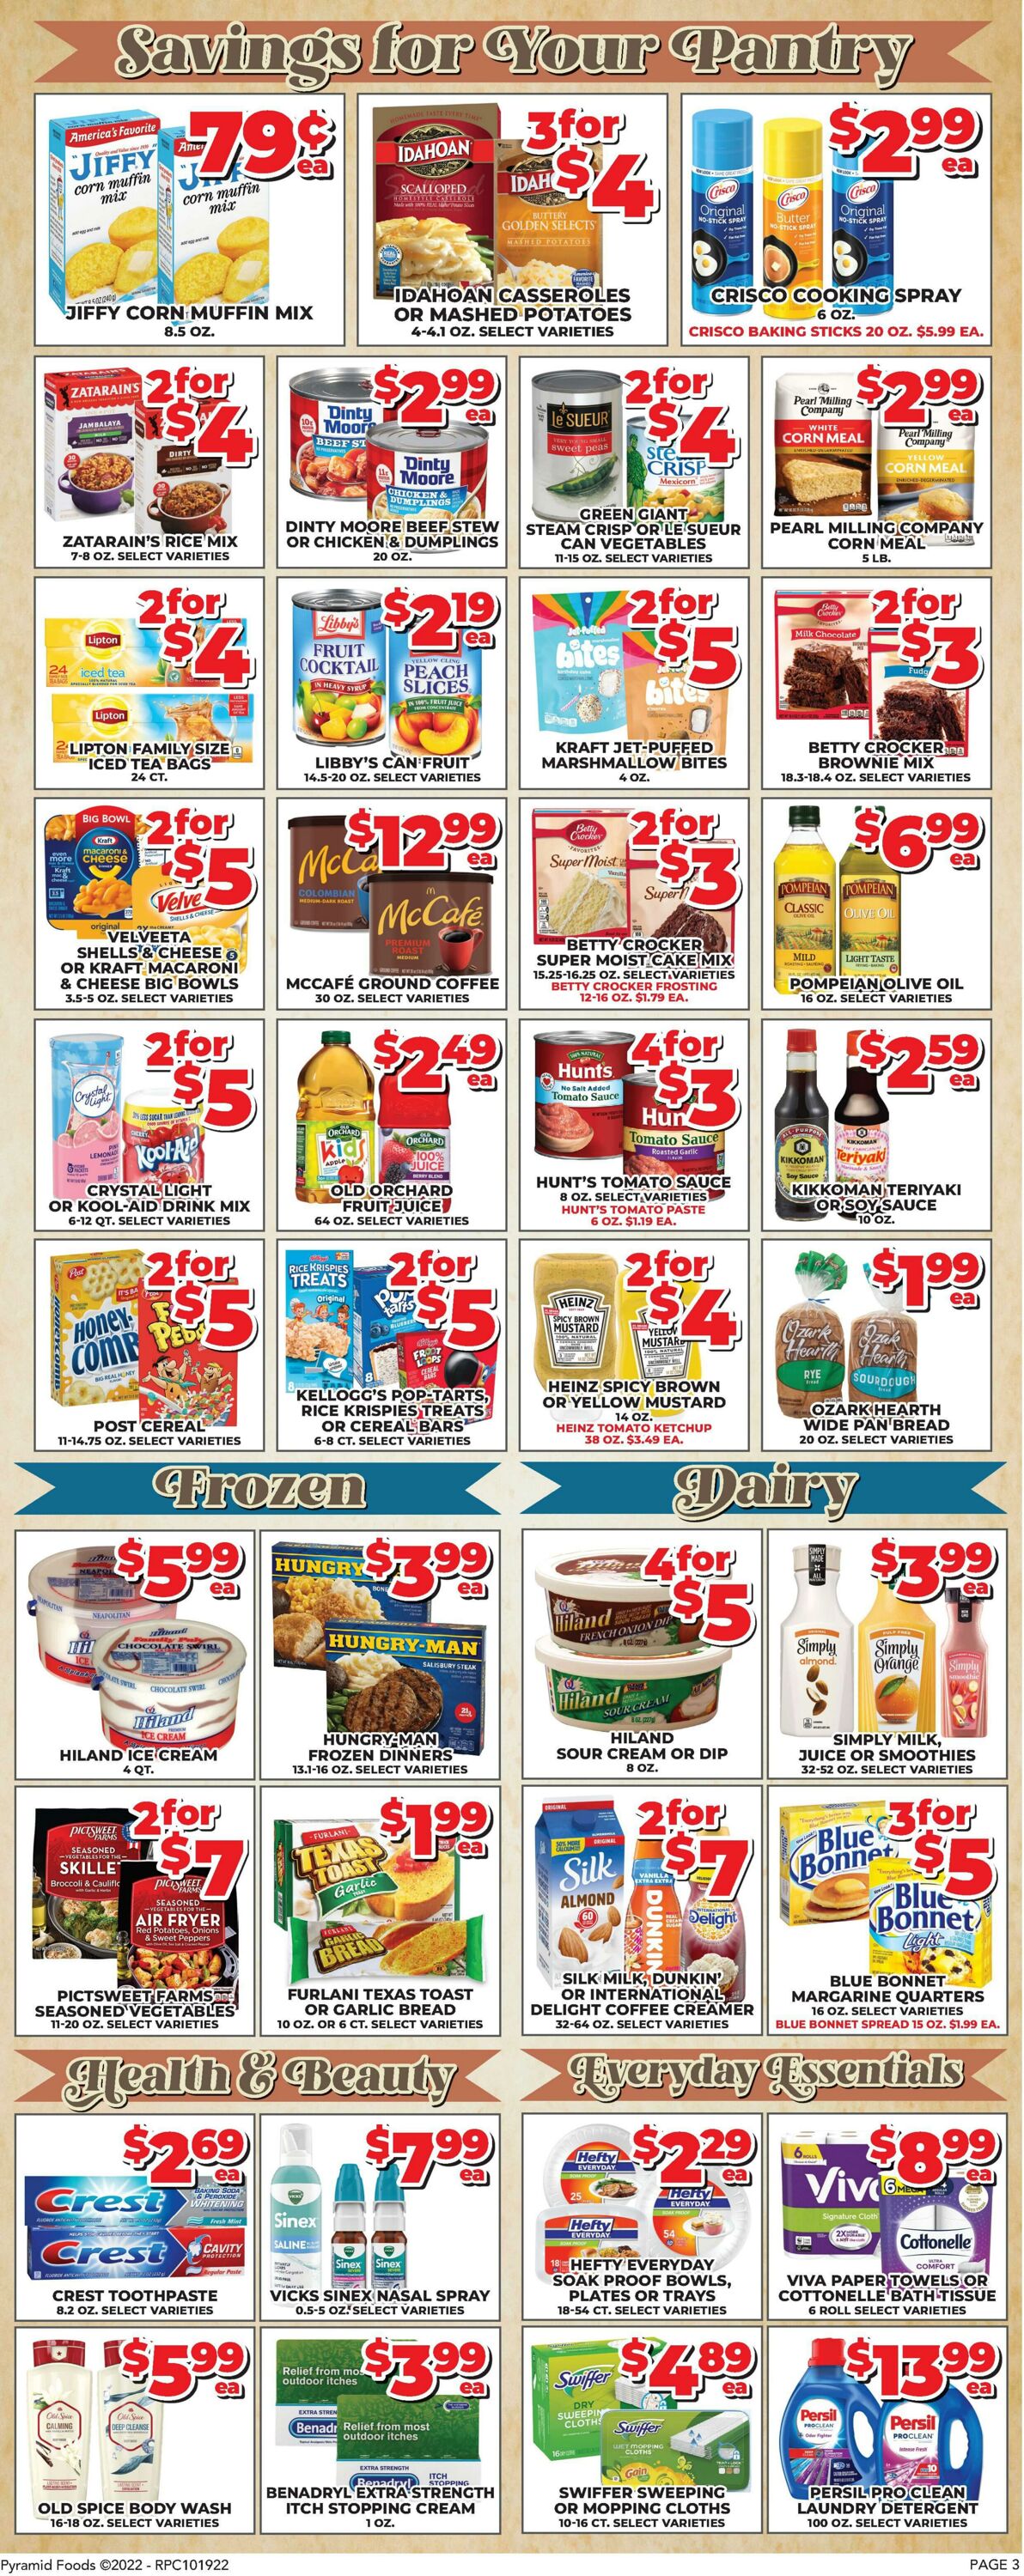 Weekly ad Price Cutter 10/19/2022 - 10/25/2022